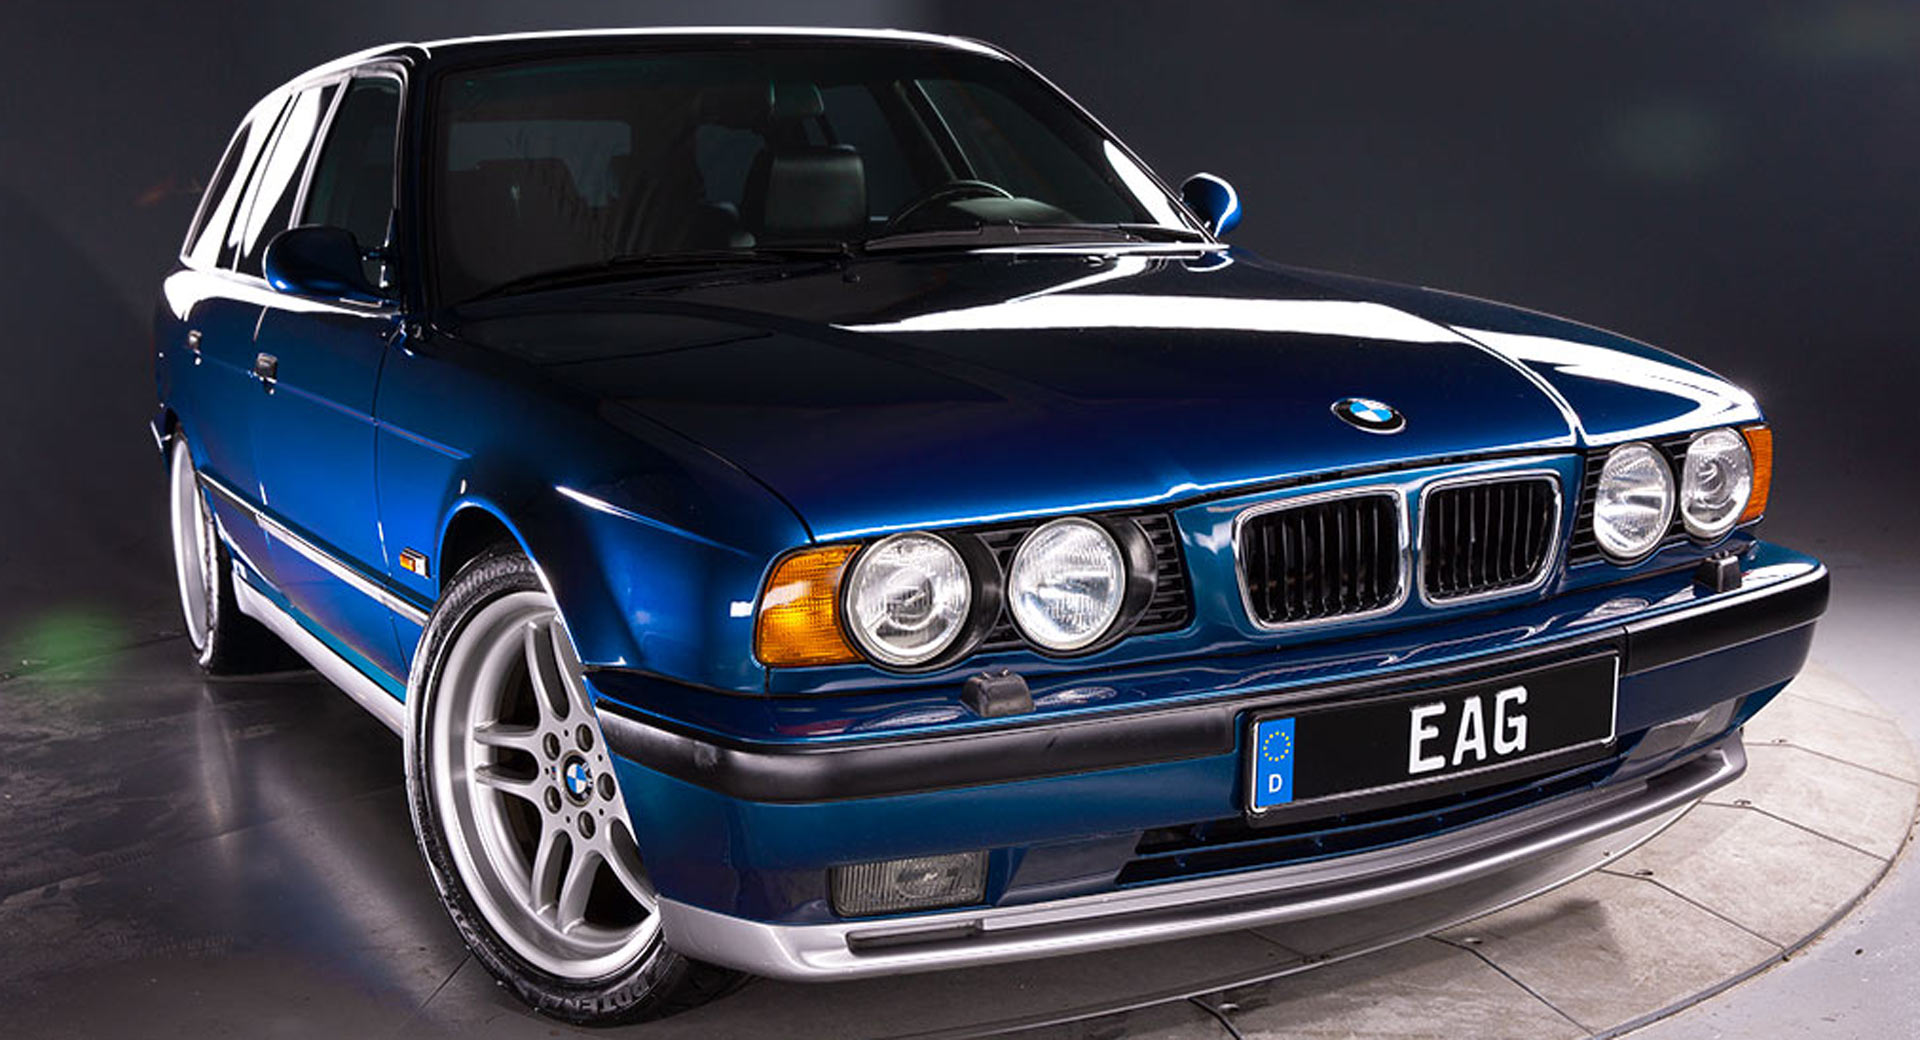 There's A Stunning 1994 BMW E34 M5 Touring For Sale In The States